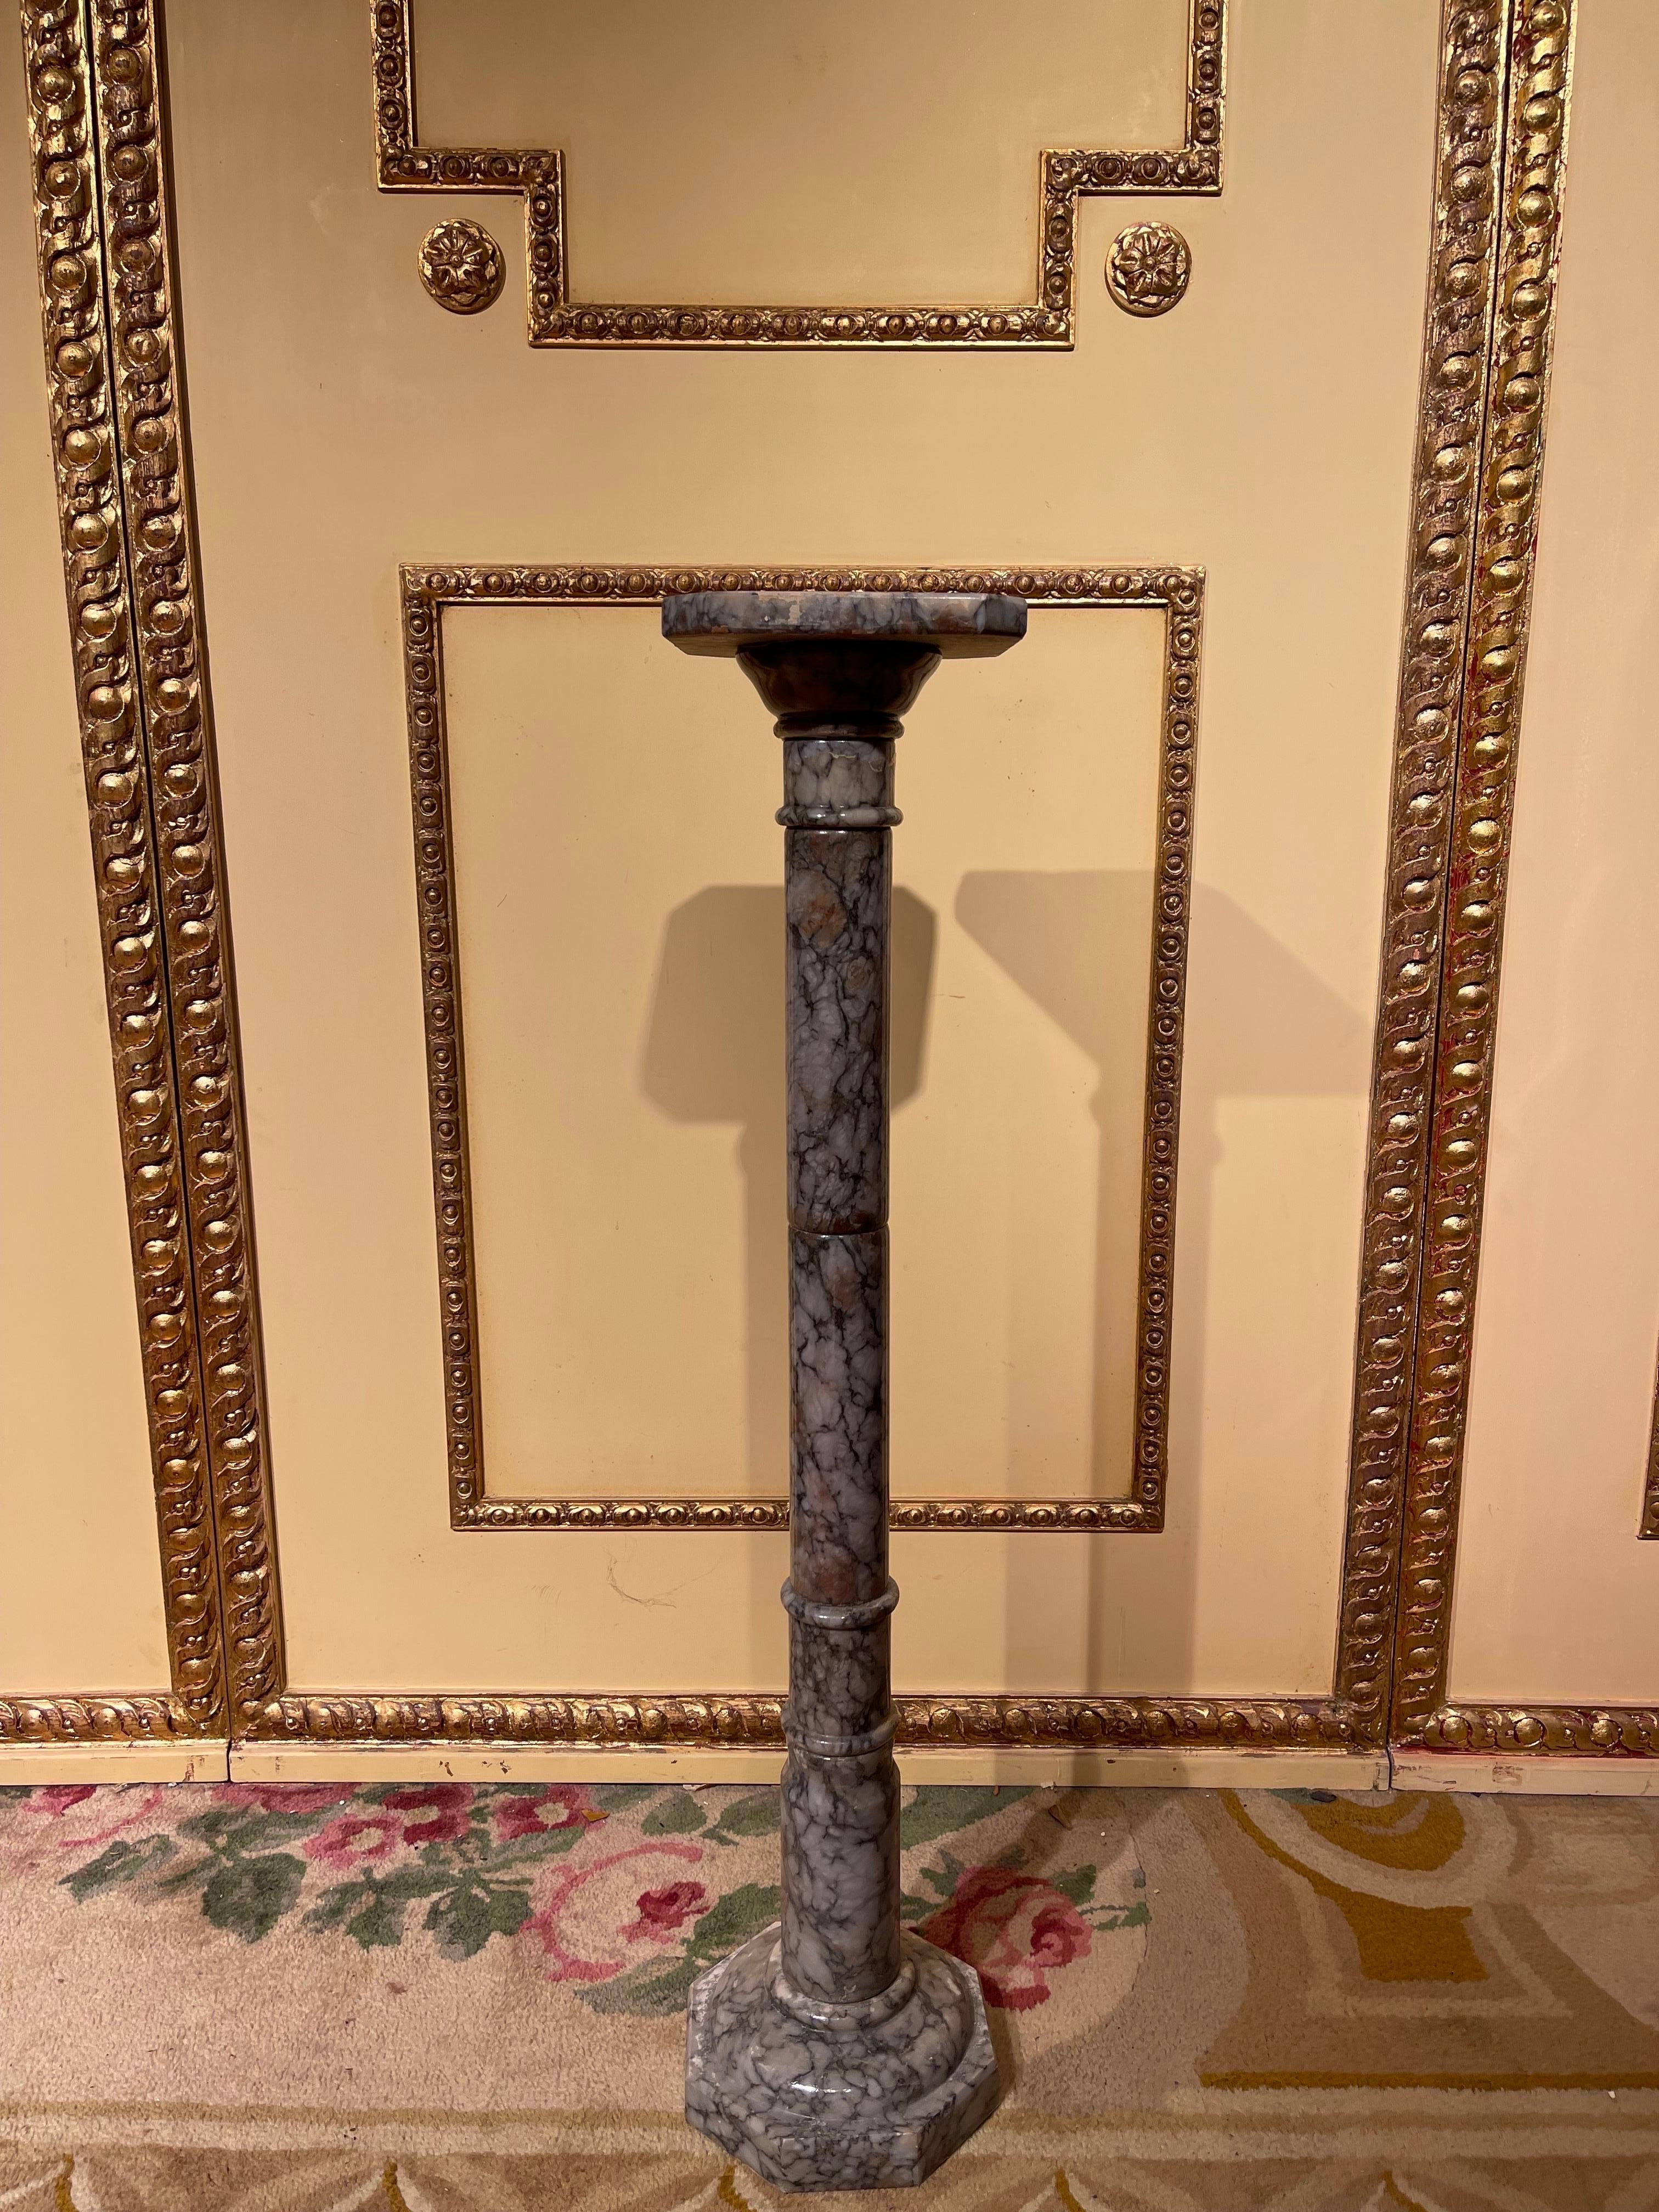 20th century quality marble pillar / column in neoclassical style

Square plinth with balustrade pillar base. Far protruding, stepped square cover plate.